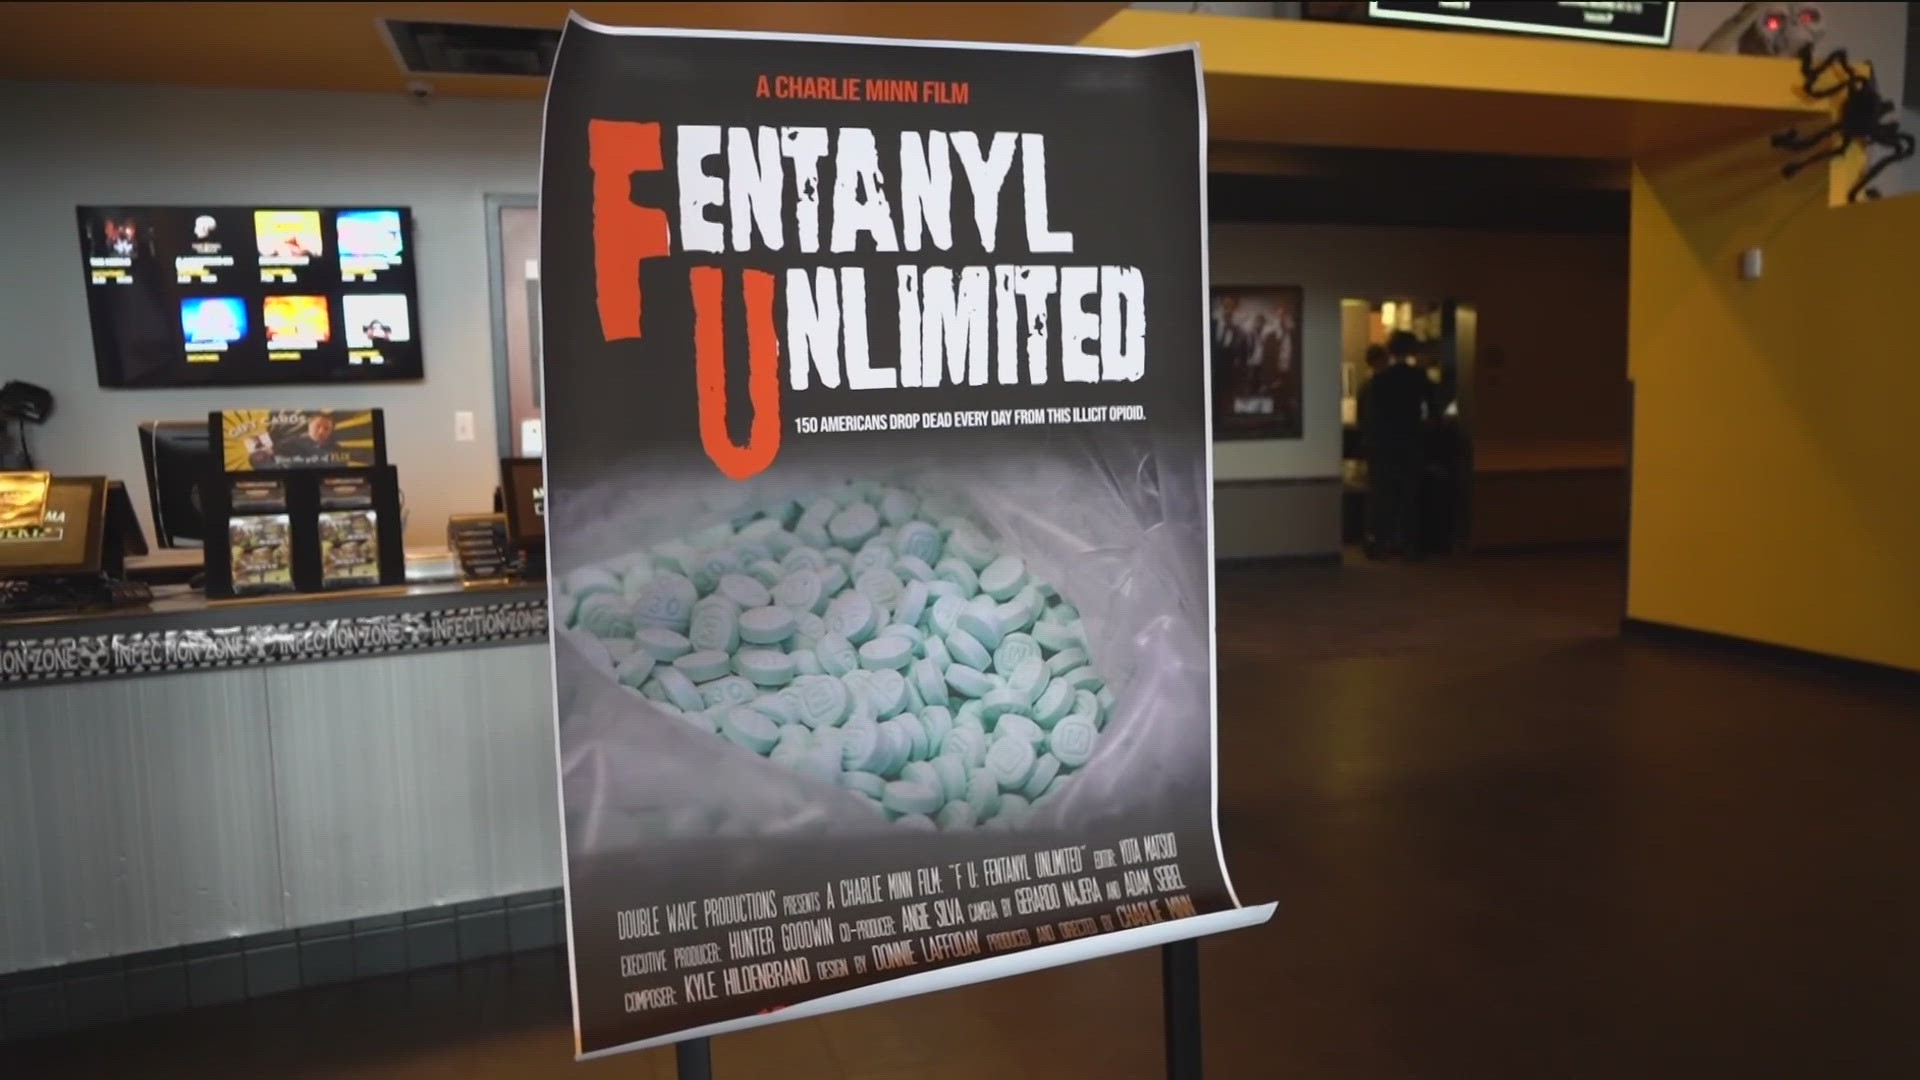 The documentary showcases the raw reality of fentanyl addictions, overdoses and poisonings.